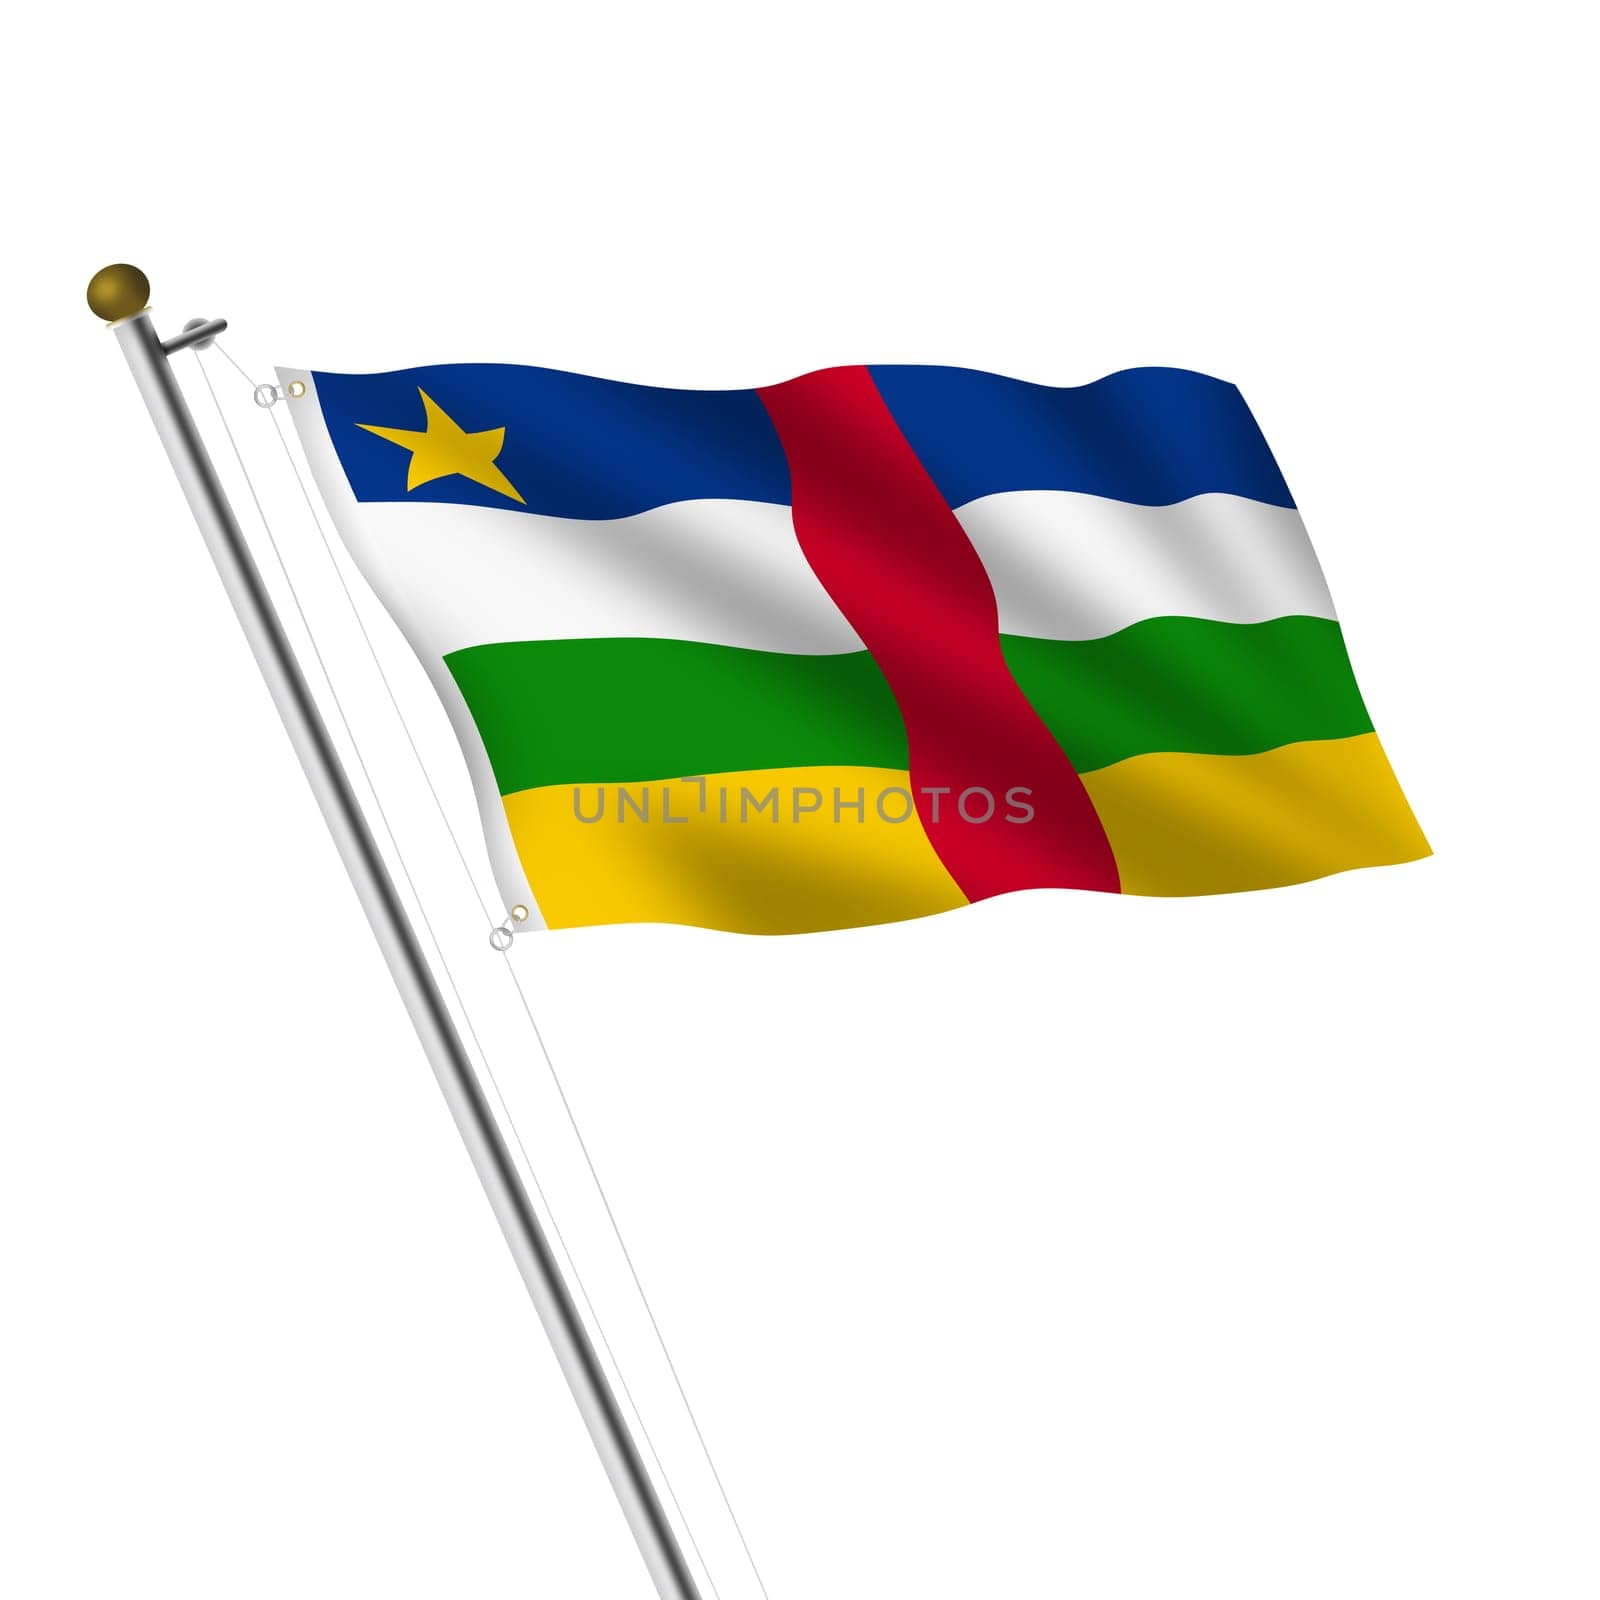 Central African Republic Flagpole with clipping path by VivacityImages